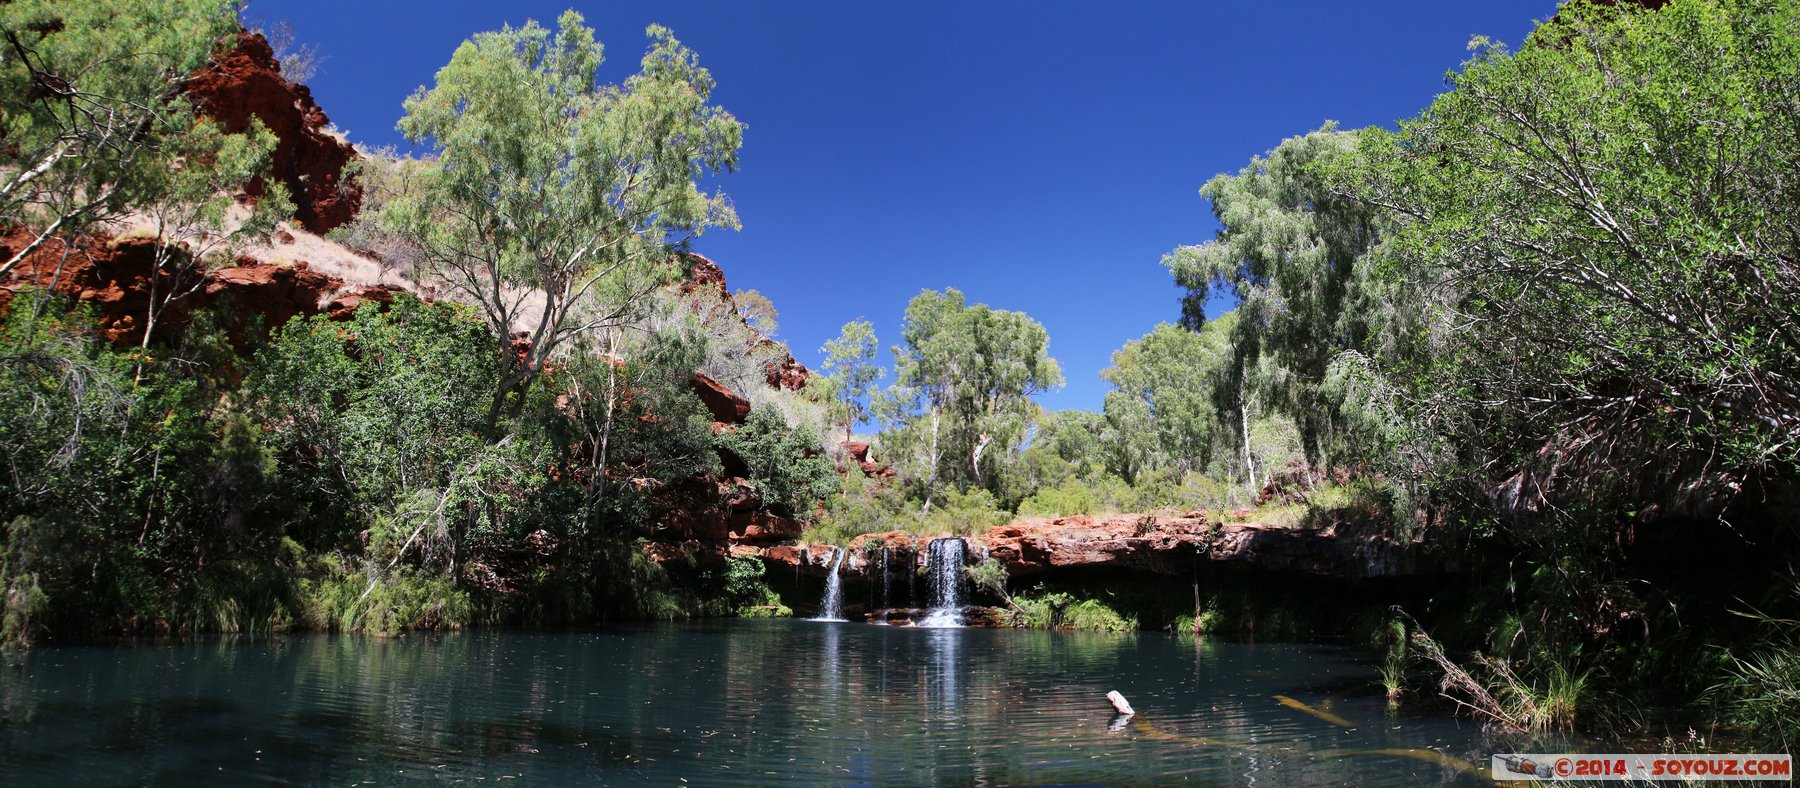 Karijini National Park - Dales Gorges - Fern Pool - Panorama
Stitched Panorama
Mots-clés: AUS Australie geo:lat=-22.47751624 geo:lon=118.54805410 geotagged Wittenoom Western Australia Karijini National Park Karijini Dales Gorges Fern Pool Lac Arbres panorama